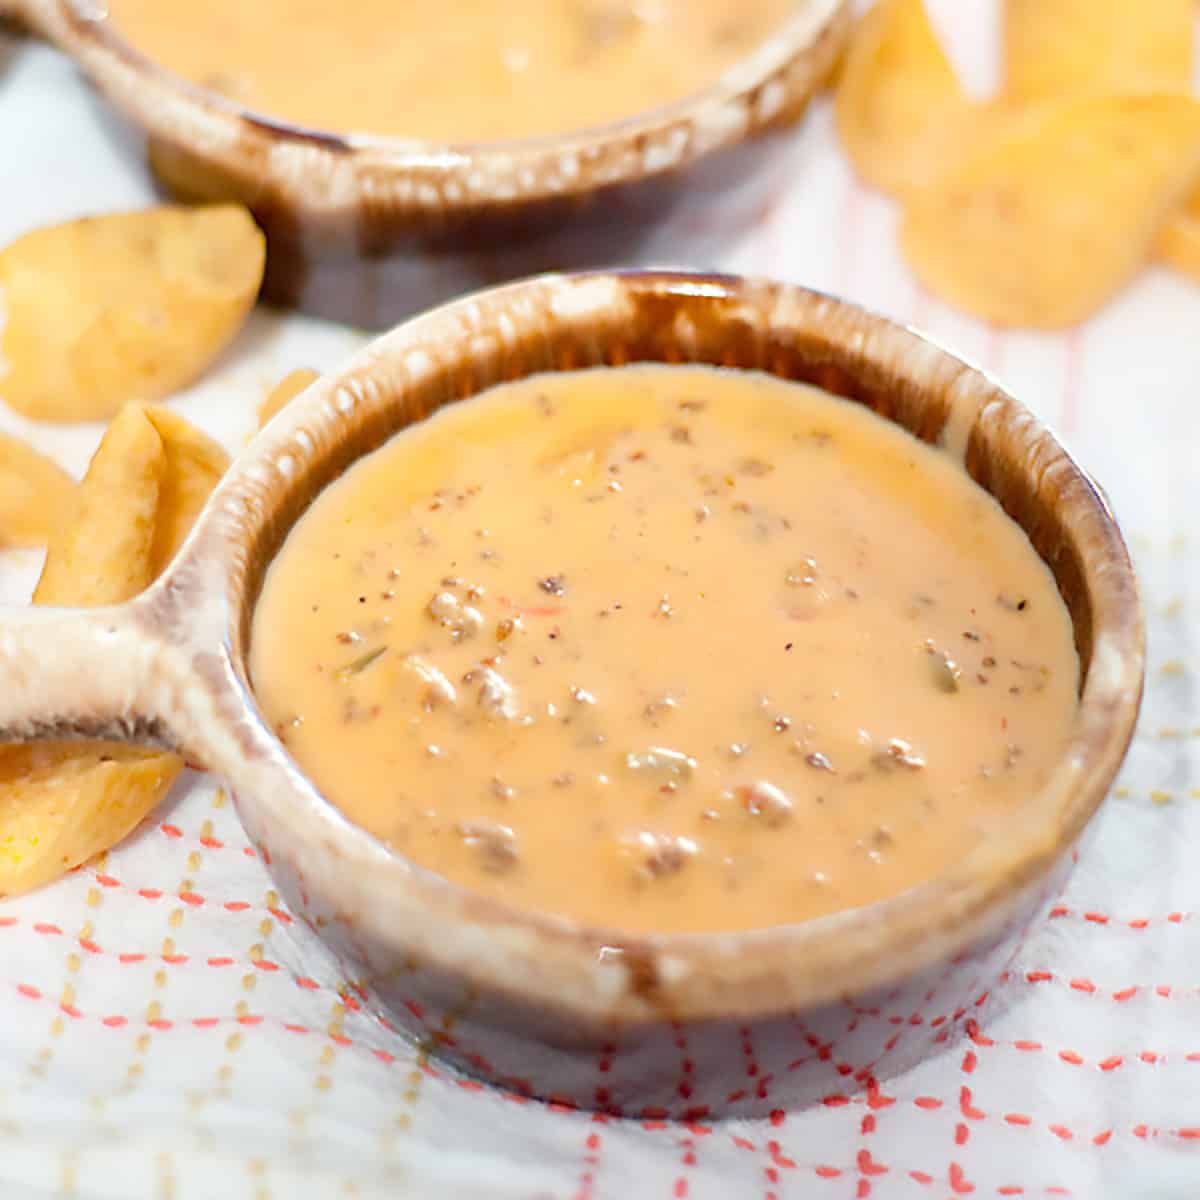 Sausage cheese dip in a small brown bowl.